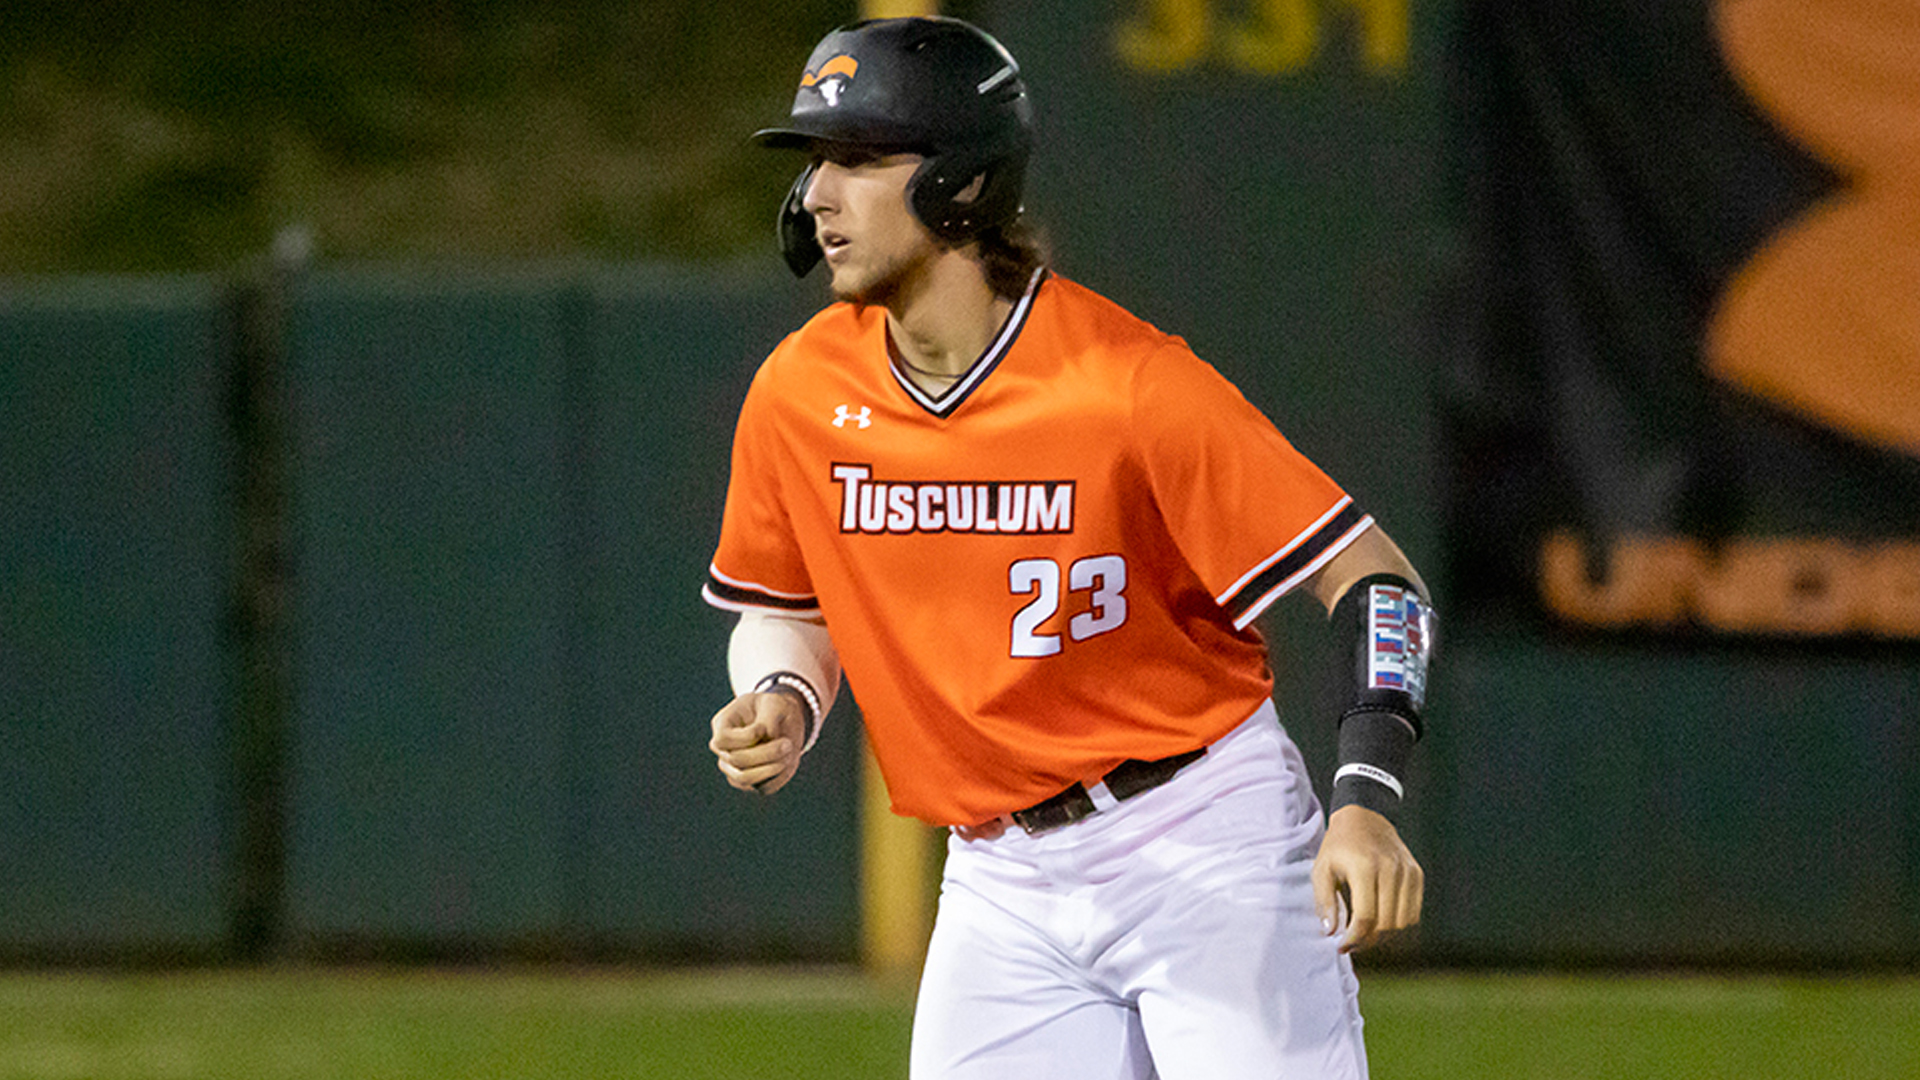 Brandon Trammell went 2-for-3 with a pair of walks and a RBI in Tusculum's 8-7 win over King (photo by Chuck Williams)